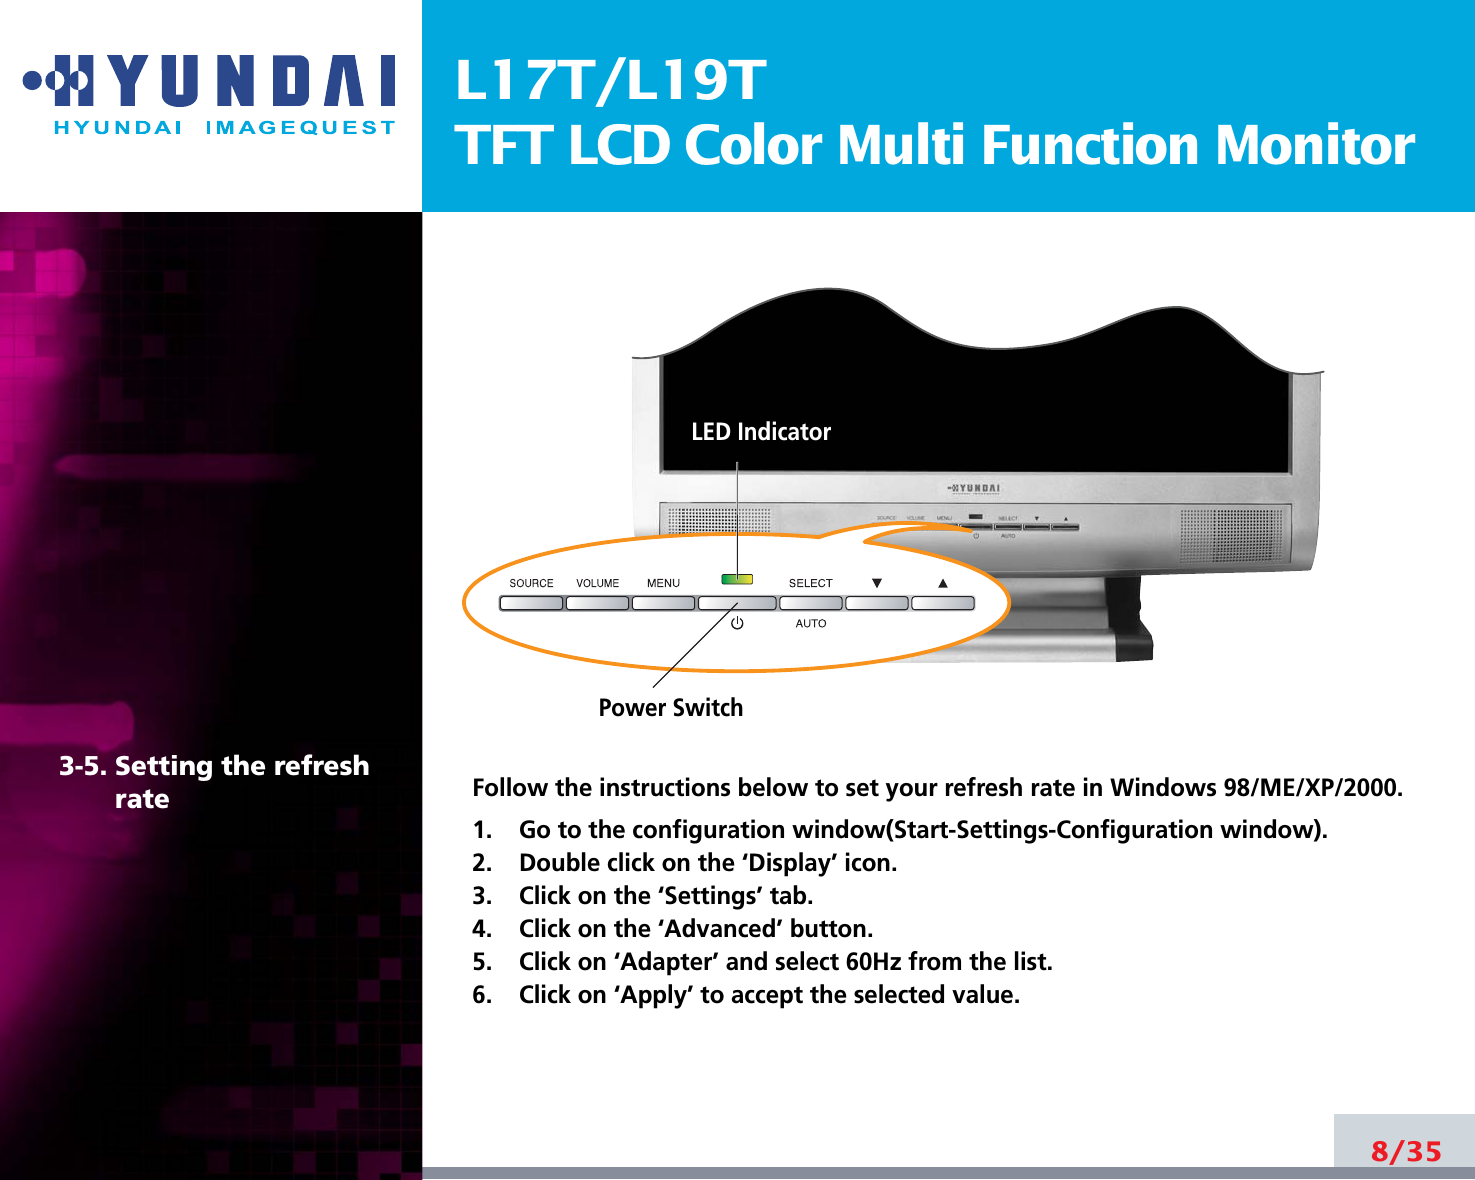 L17T/L19TTFT LCD Color Multi Function Monitor8/353-5. Setting the refreshrate Follow the instructions below to set your refresh rate in Windows 98/ME/XP/2000.1.    Go to the configuration window(Start-Settings-Configuration window).2.    Double click on the ‘Display’ icon.3.    Click on the ‘Settings’ tab.4.    Click on the ‘Advanced’ button.5.    Click on ‘Adapter’ and select 60Hz from the list.6.    Click on ‘Apply’ to accept the selected value.Power SwitchLED Indicator